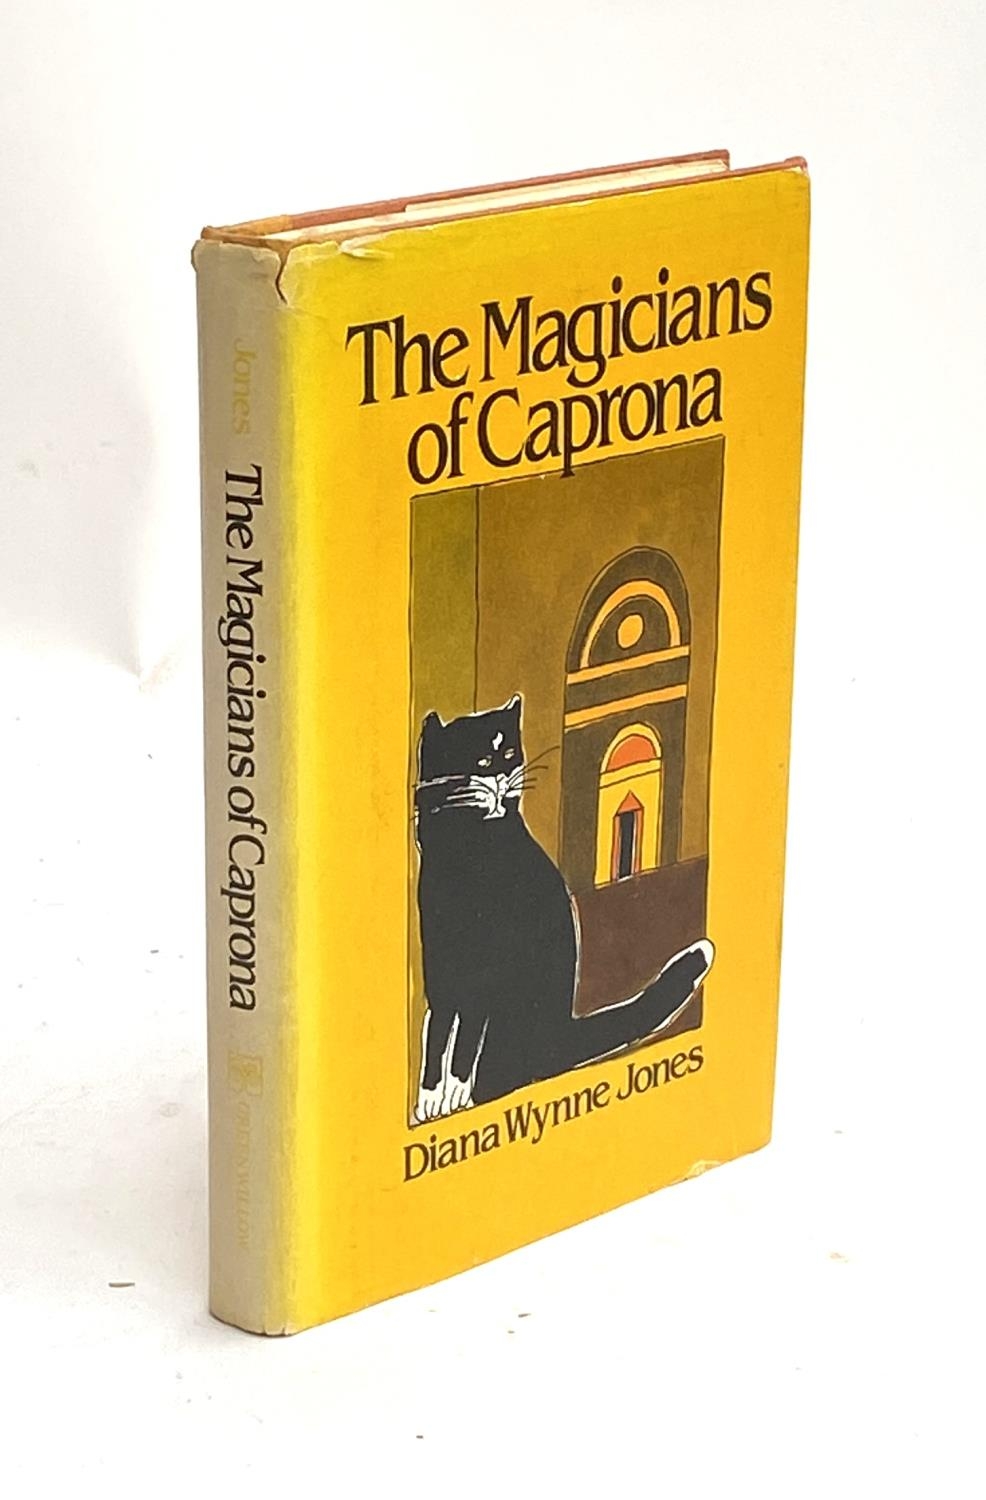 COLLECTABLE BOOK: Diana WYNNE-JONES, 'The Magicians of Caprona' 1st US, Greenwillow 1980. VG/VG.